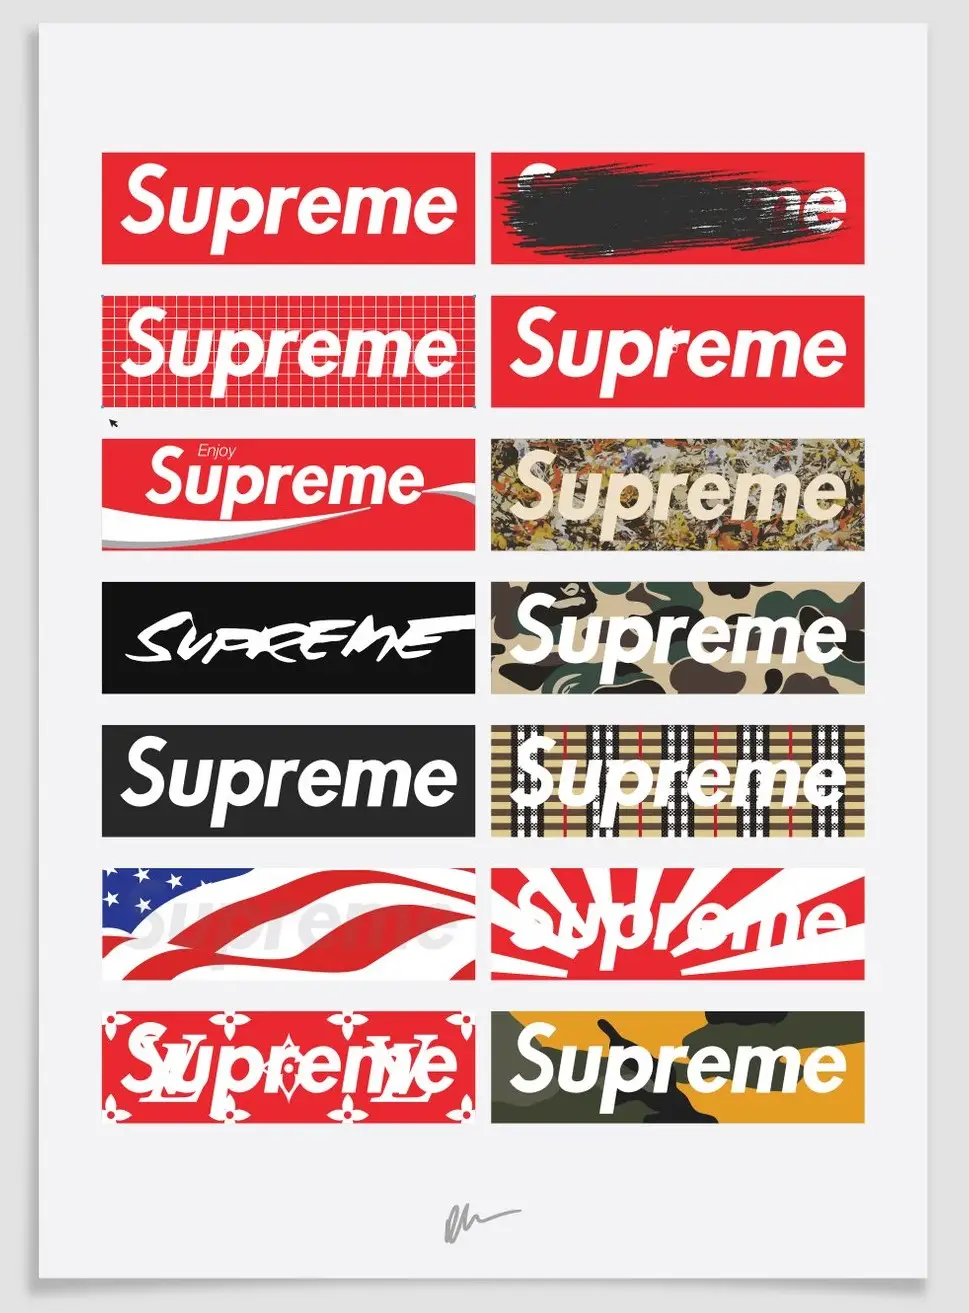 Hypebeast's Will Appreciate This Supreme Wall Art From Kick Posters ...